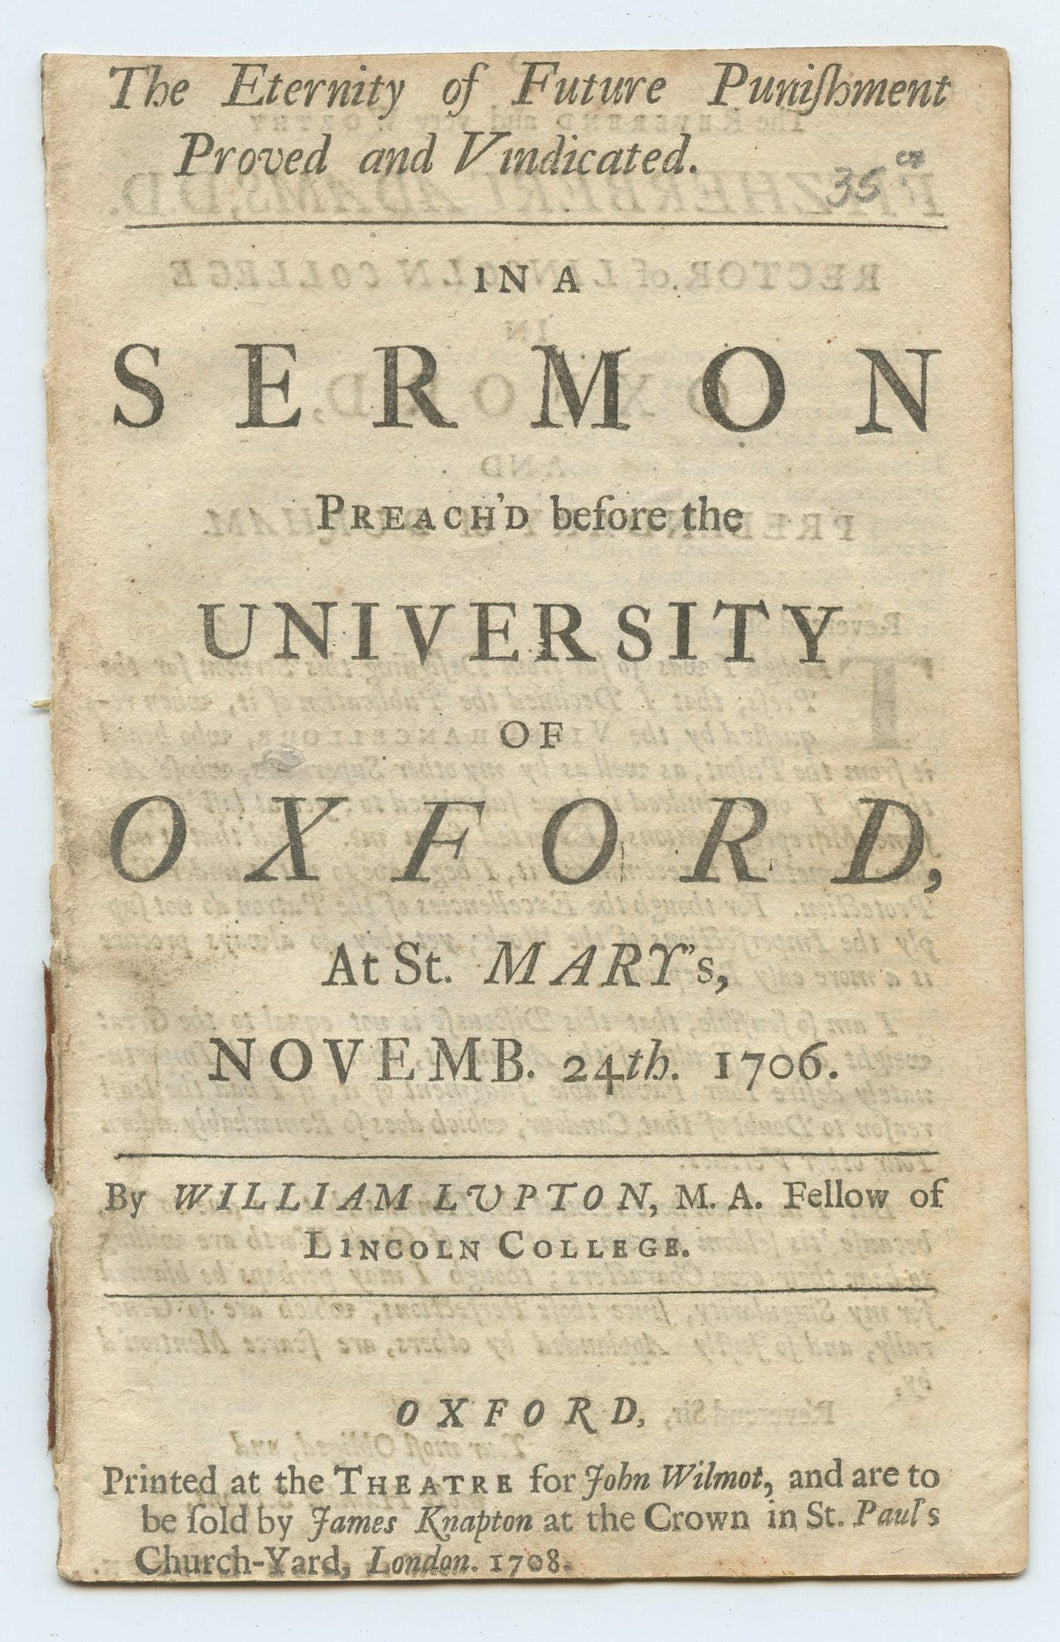 The Eternity of Future Punishment Proved and Vindicated in a Sermon Preach'd before the University of Oxford, At St. Mary's, Novemb. 24th. 1706.